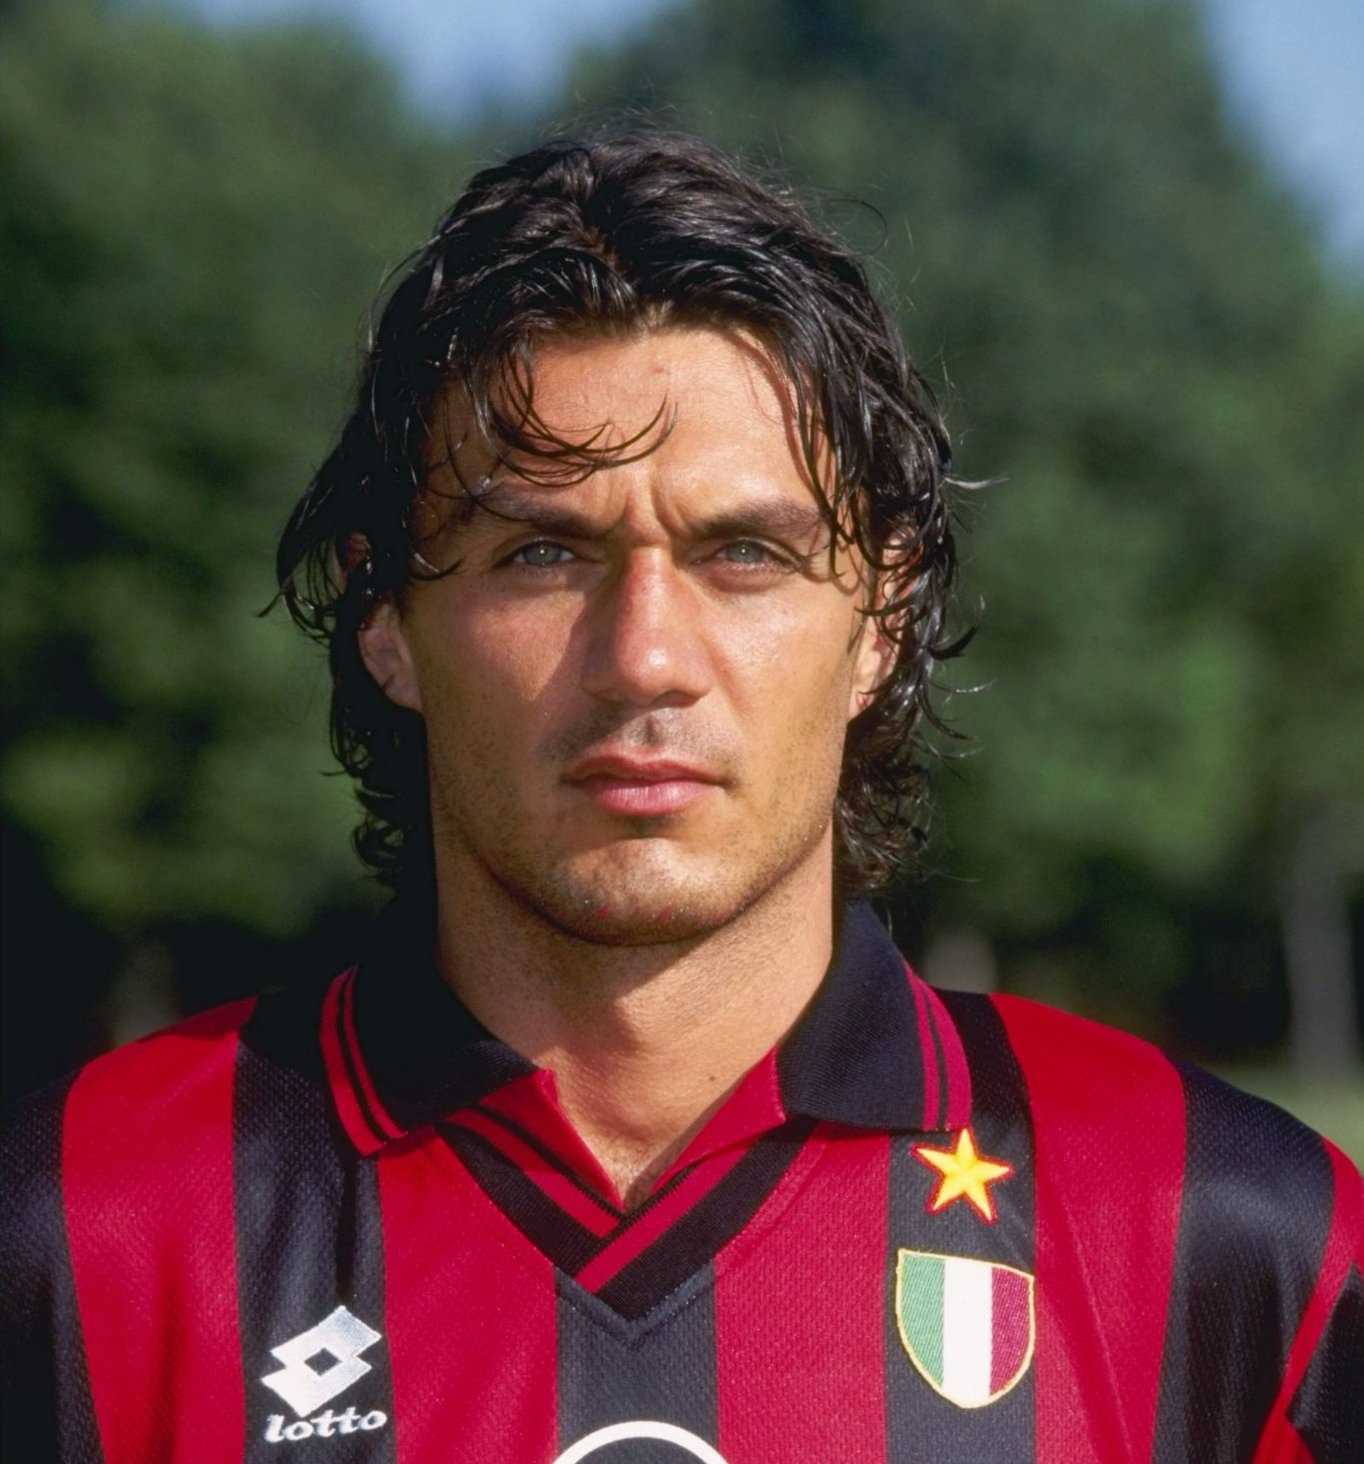 Paolo Maldini one of the best center-backs and one of the best full-backs in the world